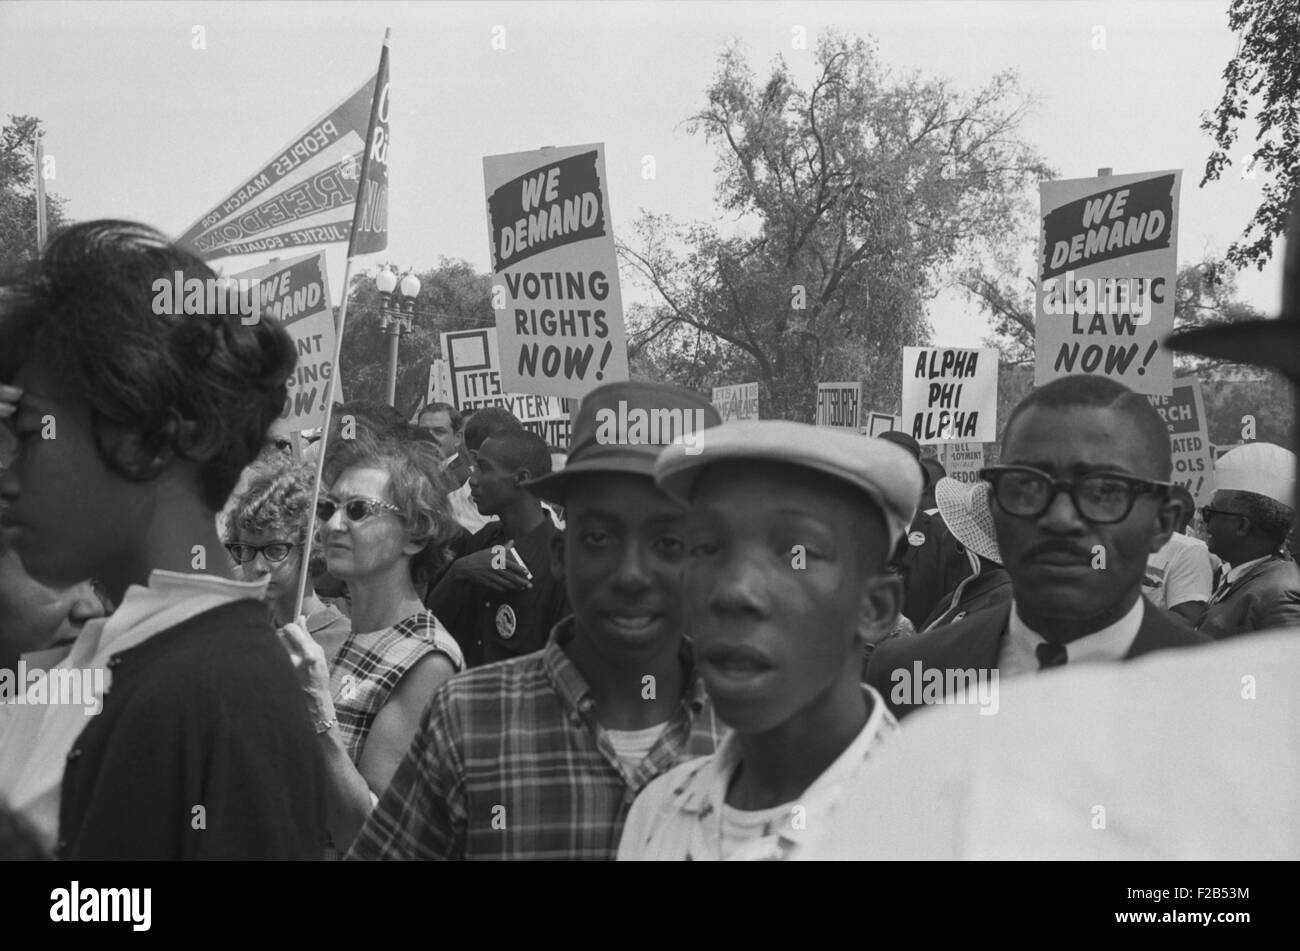 Demonstrators marching with signs during the March on Washington, Aug. 28, 1963. - (BSLOC 2015 1 100) Stock Photo